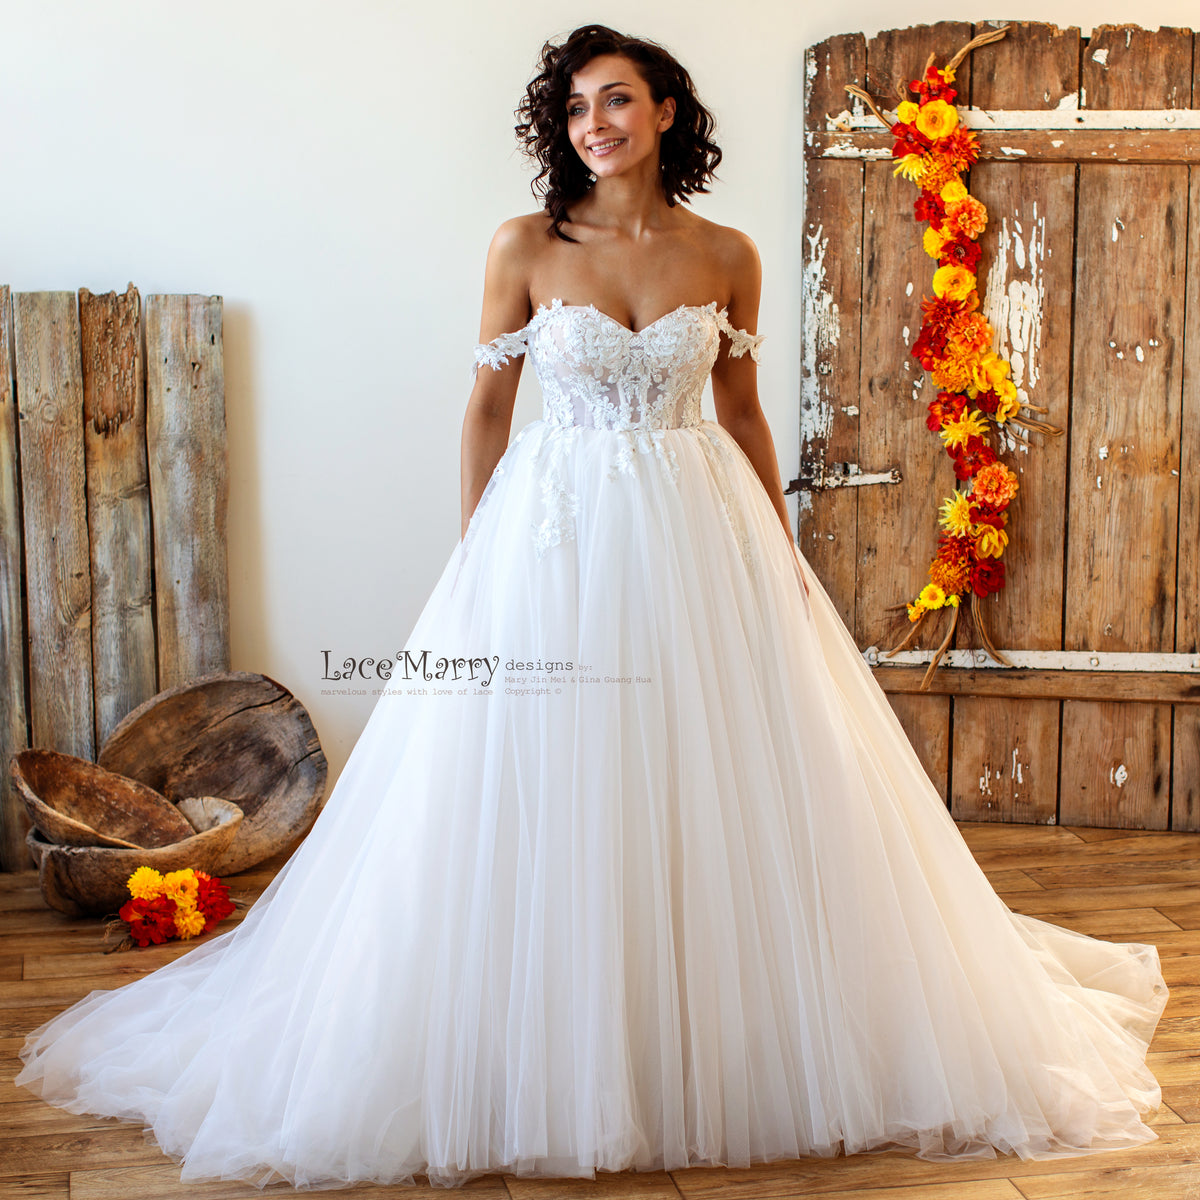 Amazing A Line Wedding Dress with Tulle Skirt and Off Shoulders